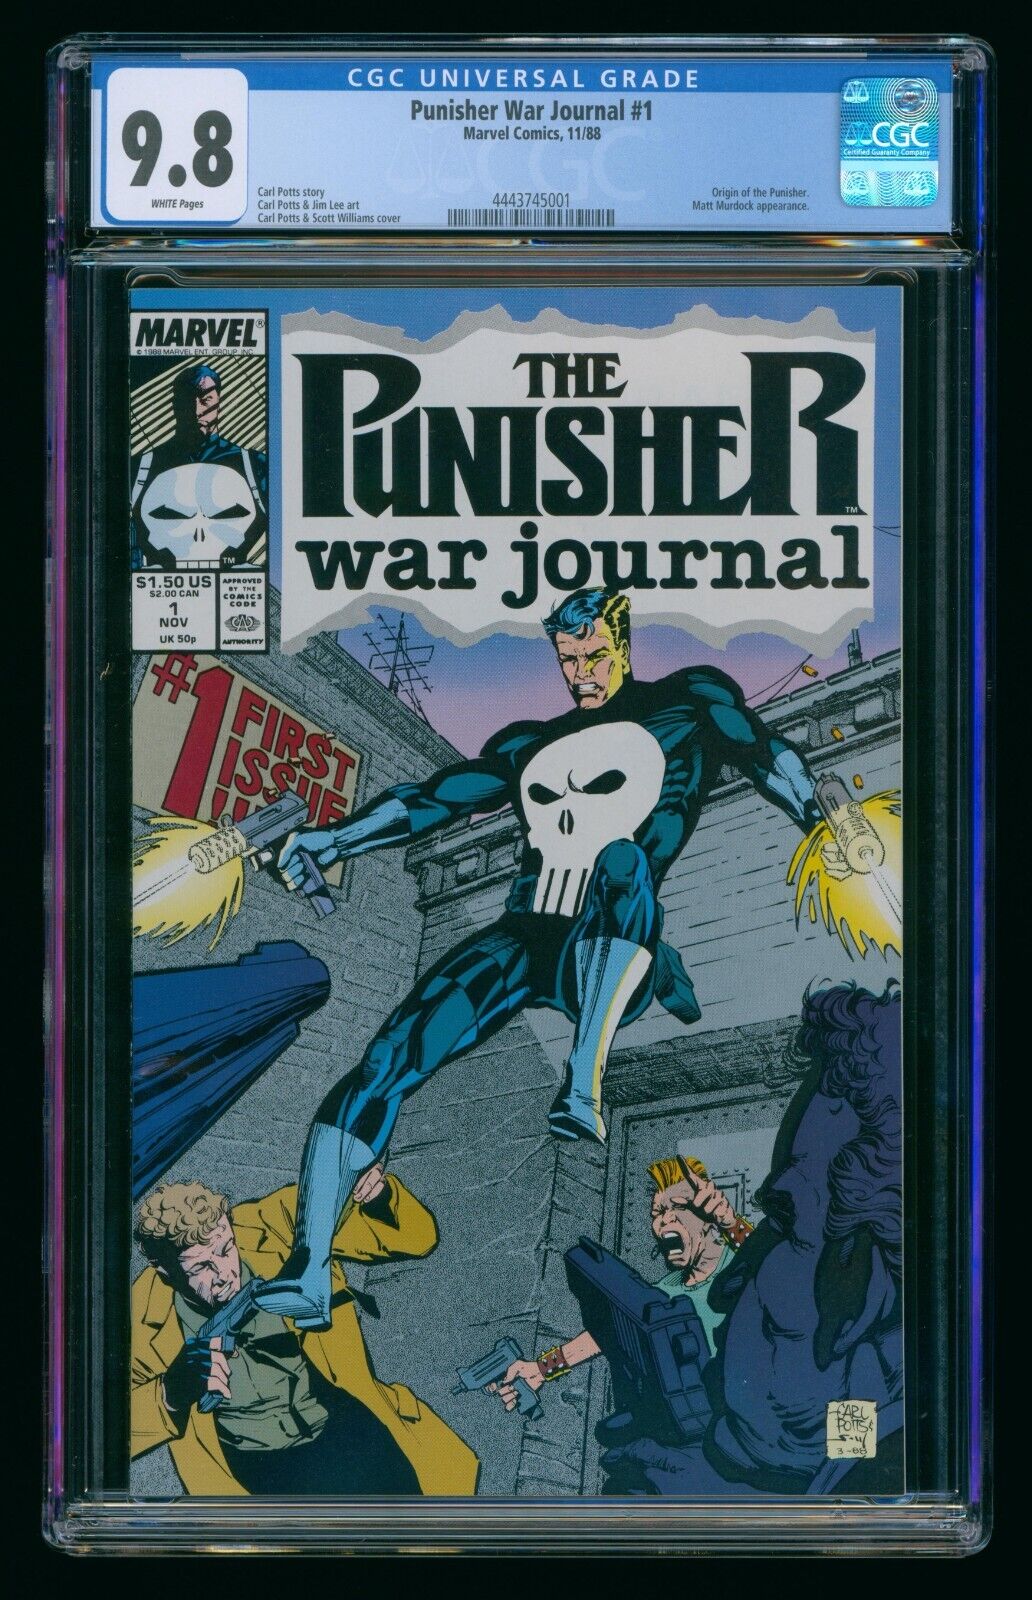 PUNISHER LIMITED SERIES #1 (1988) CGC 9.8 WHITE PAGES